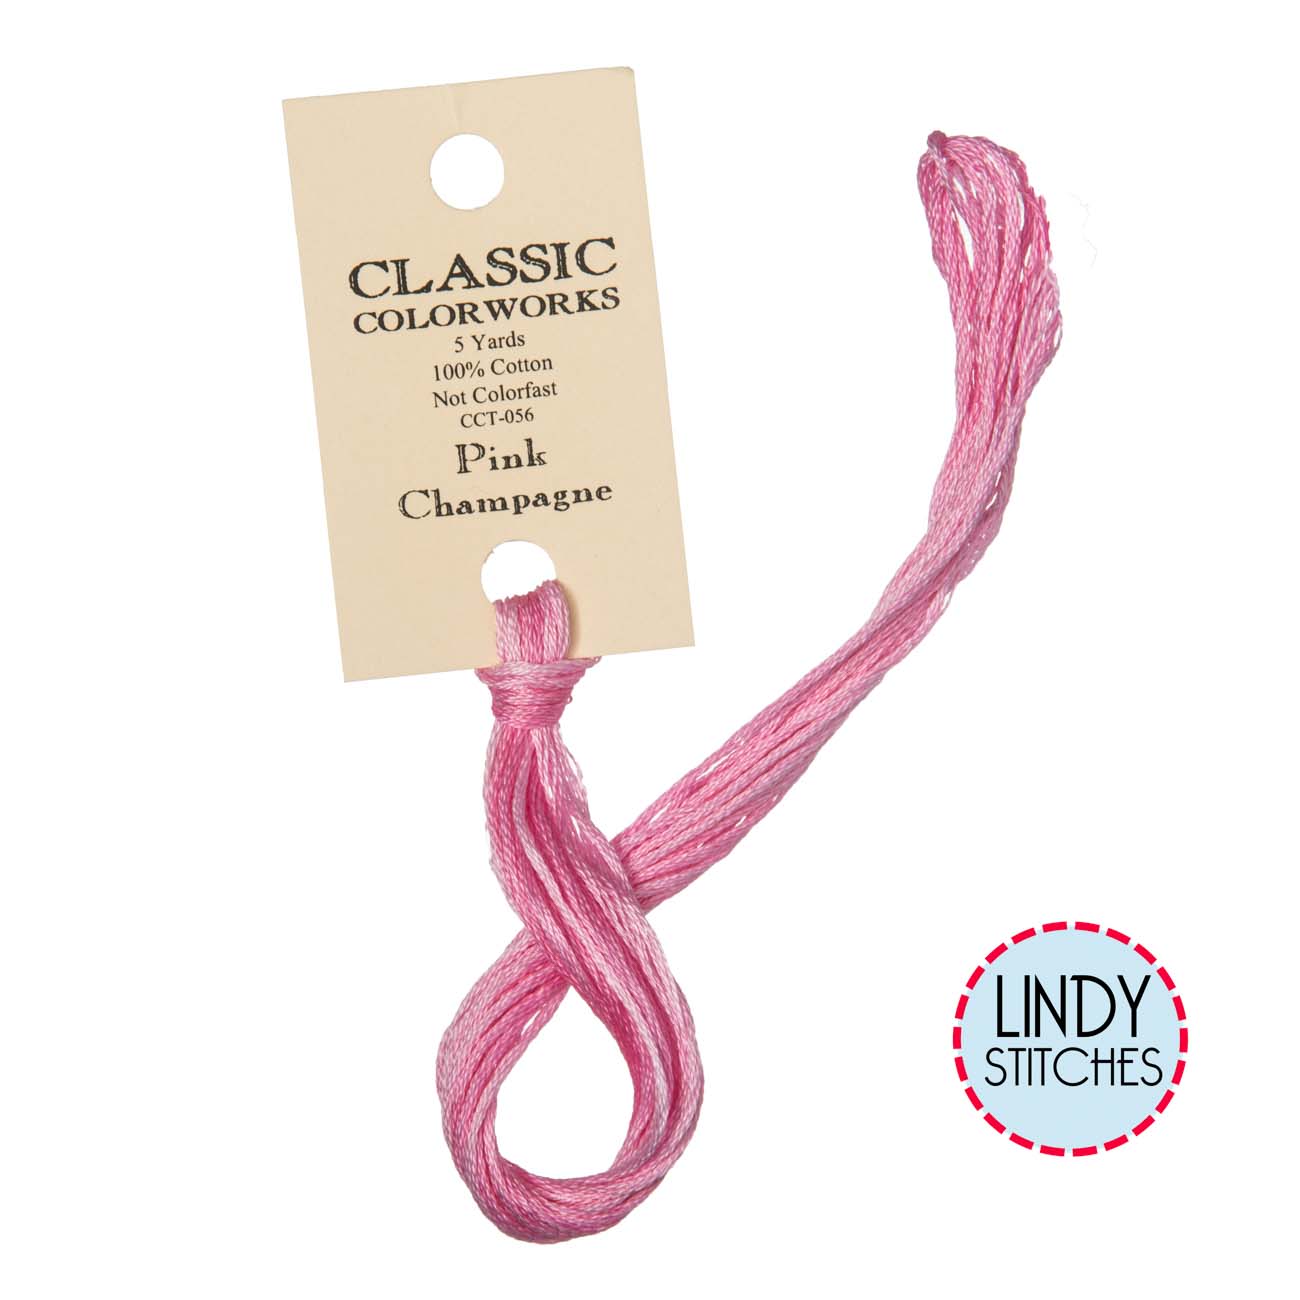 Pink Champagne Classic Colorworks Floss Hand Dyed Cotton Skein